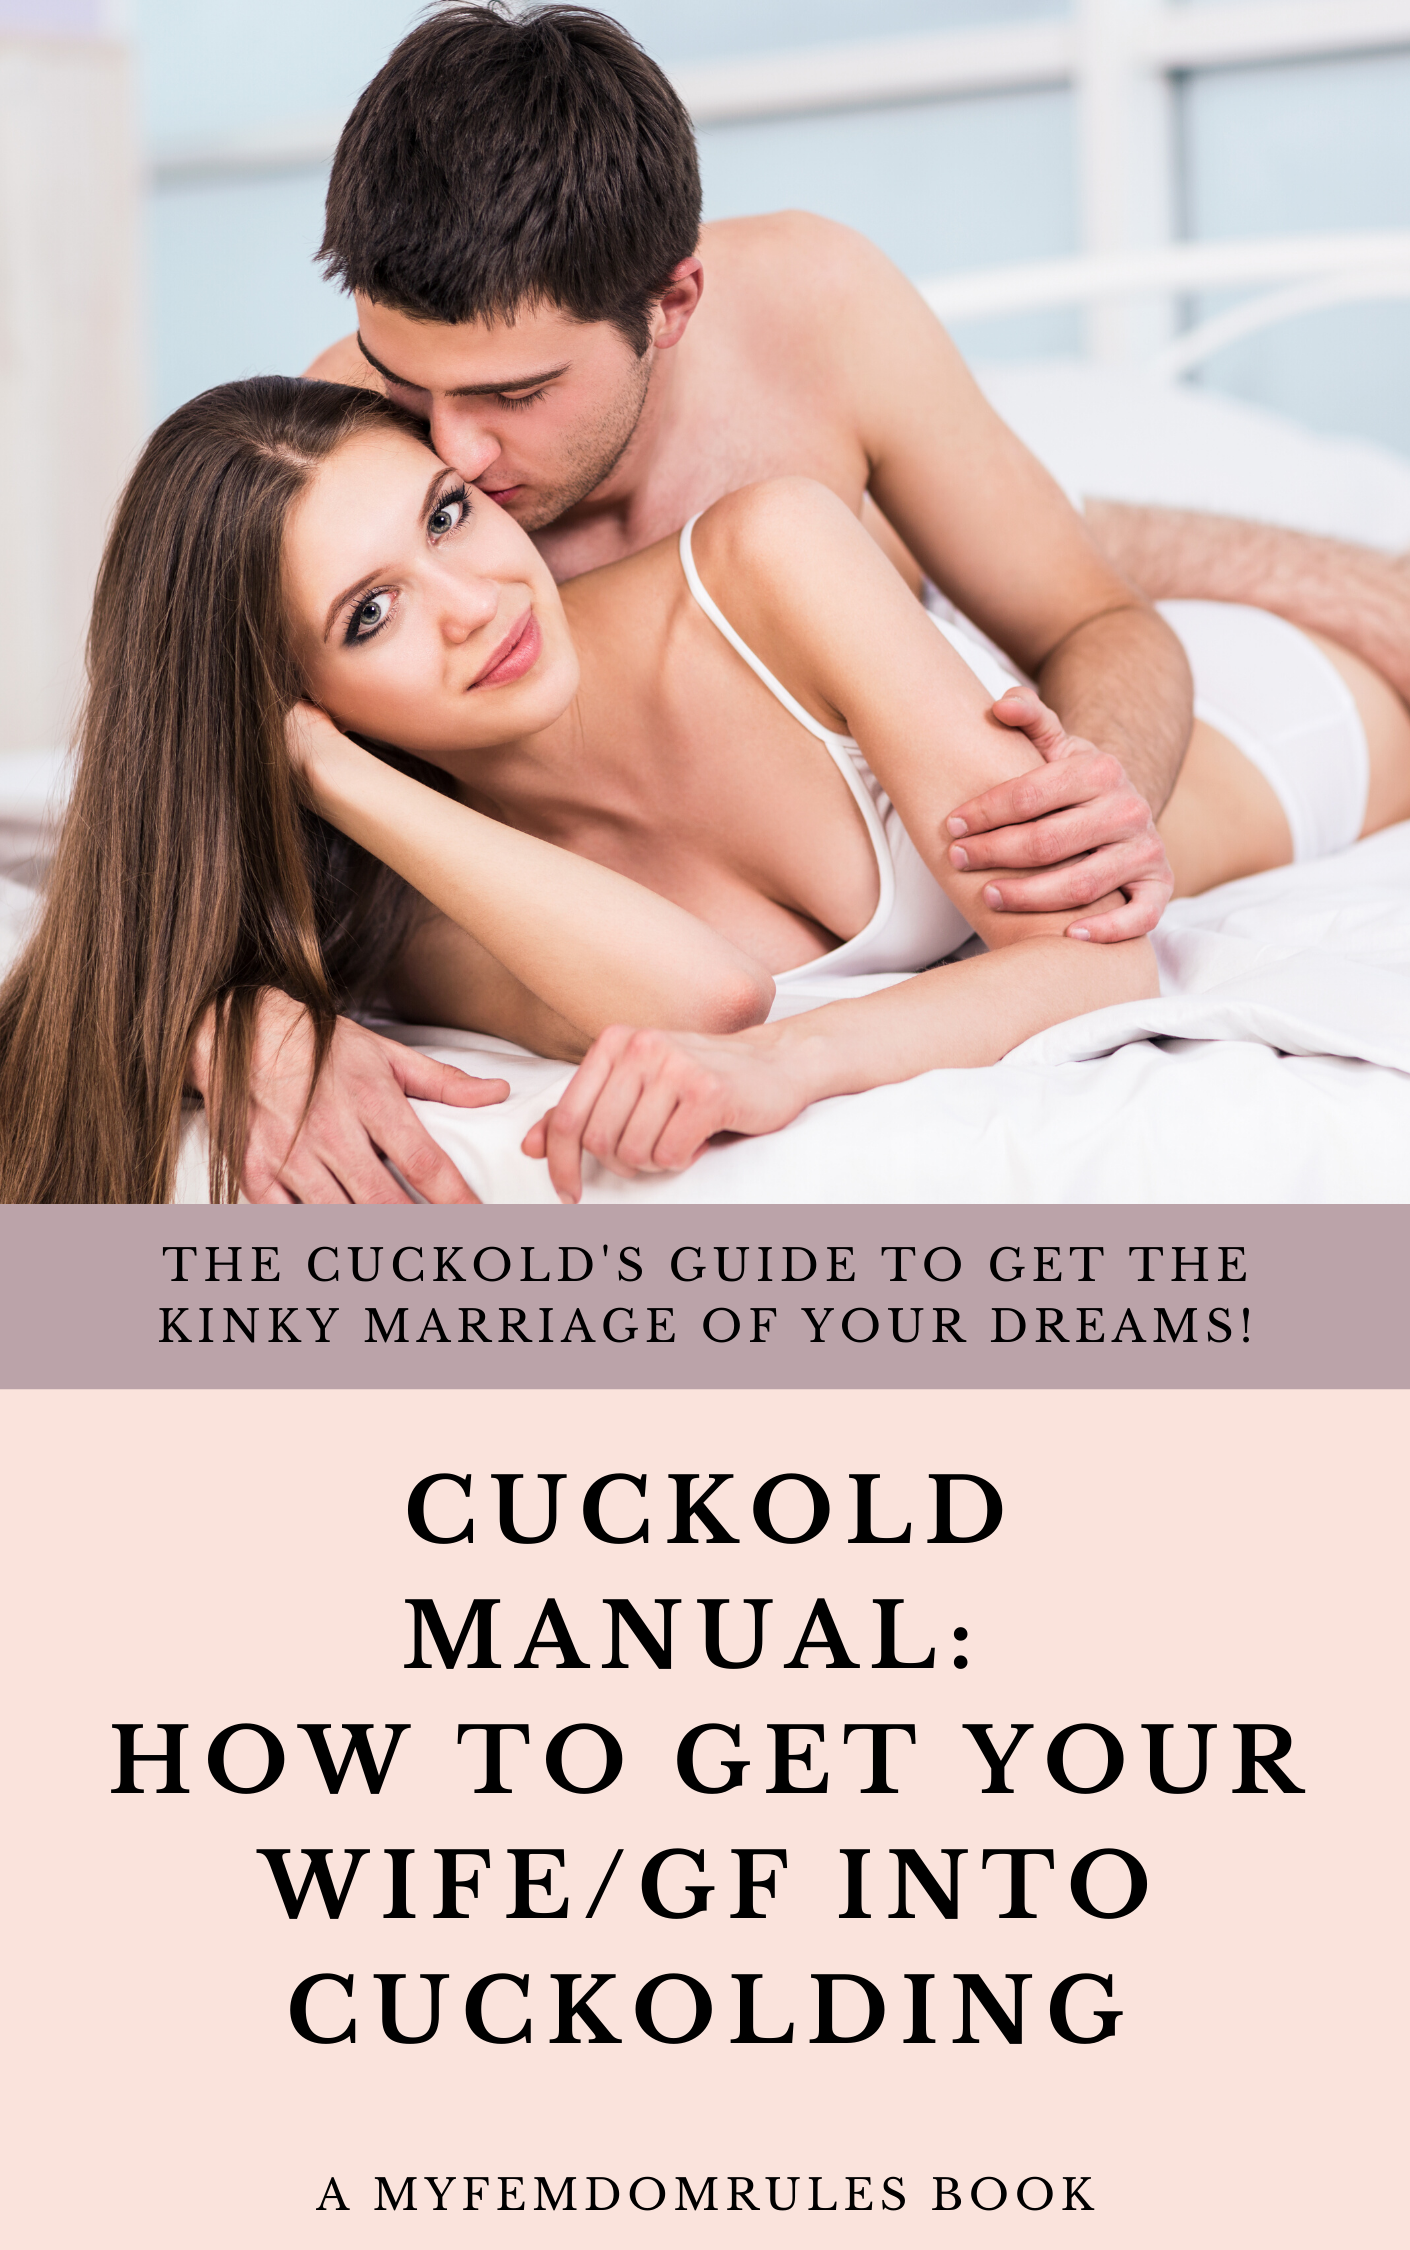 Cuckold Manual How To Get Your Wife/Girlfriend Into Cuckolding (eBook) pic